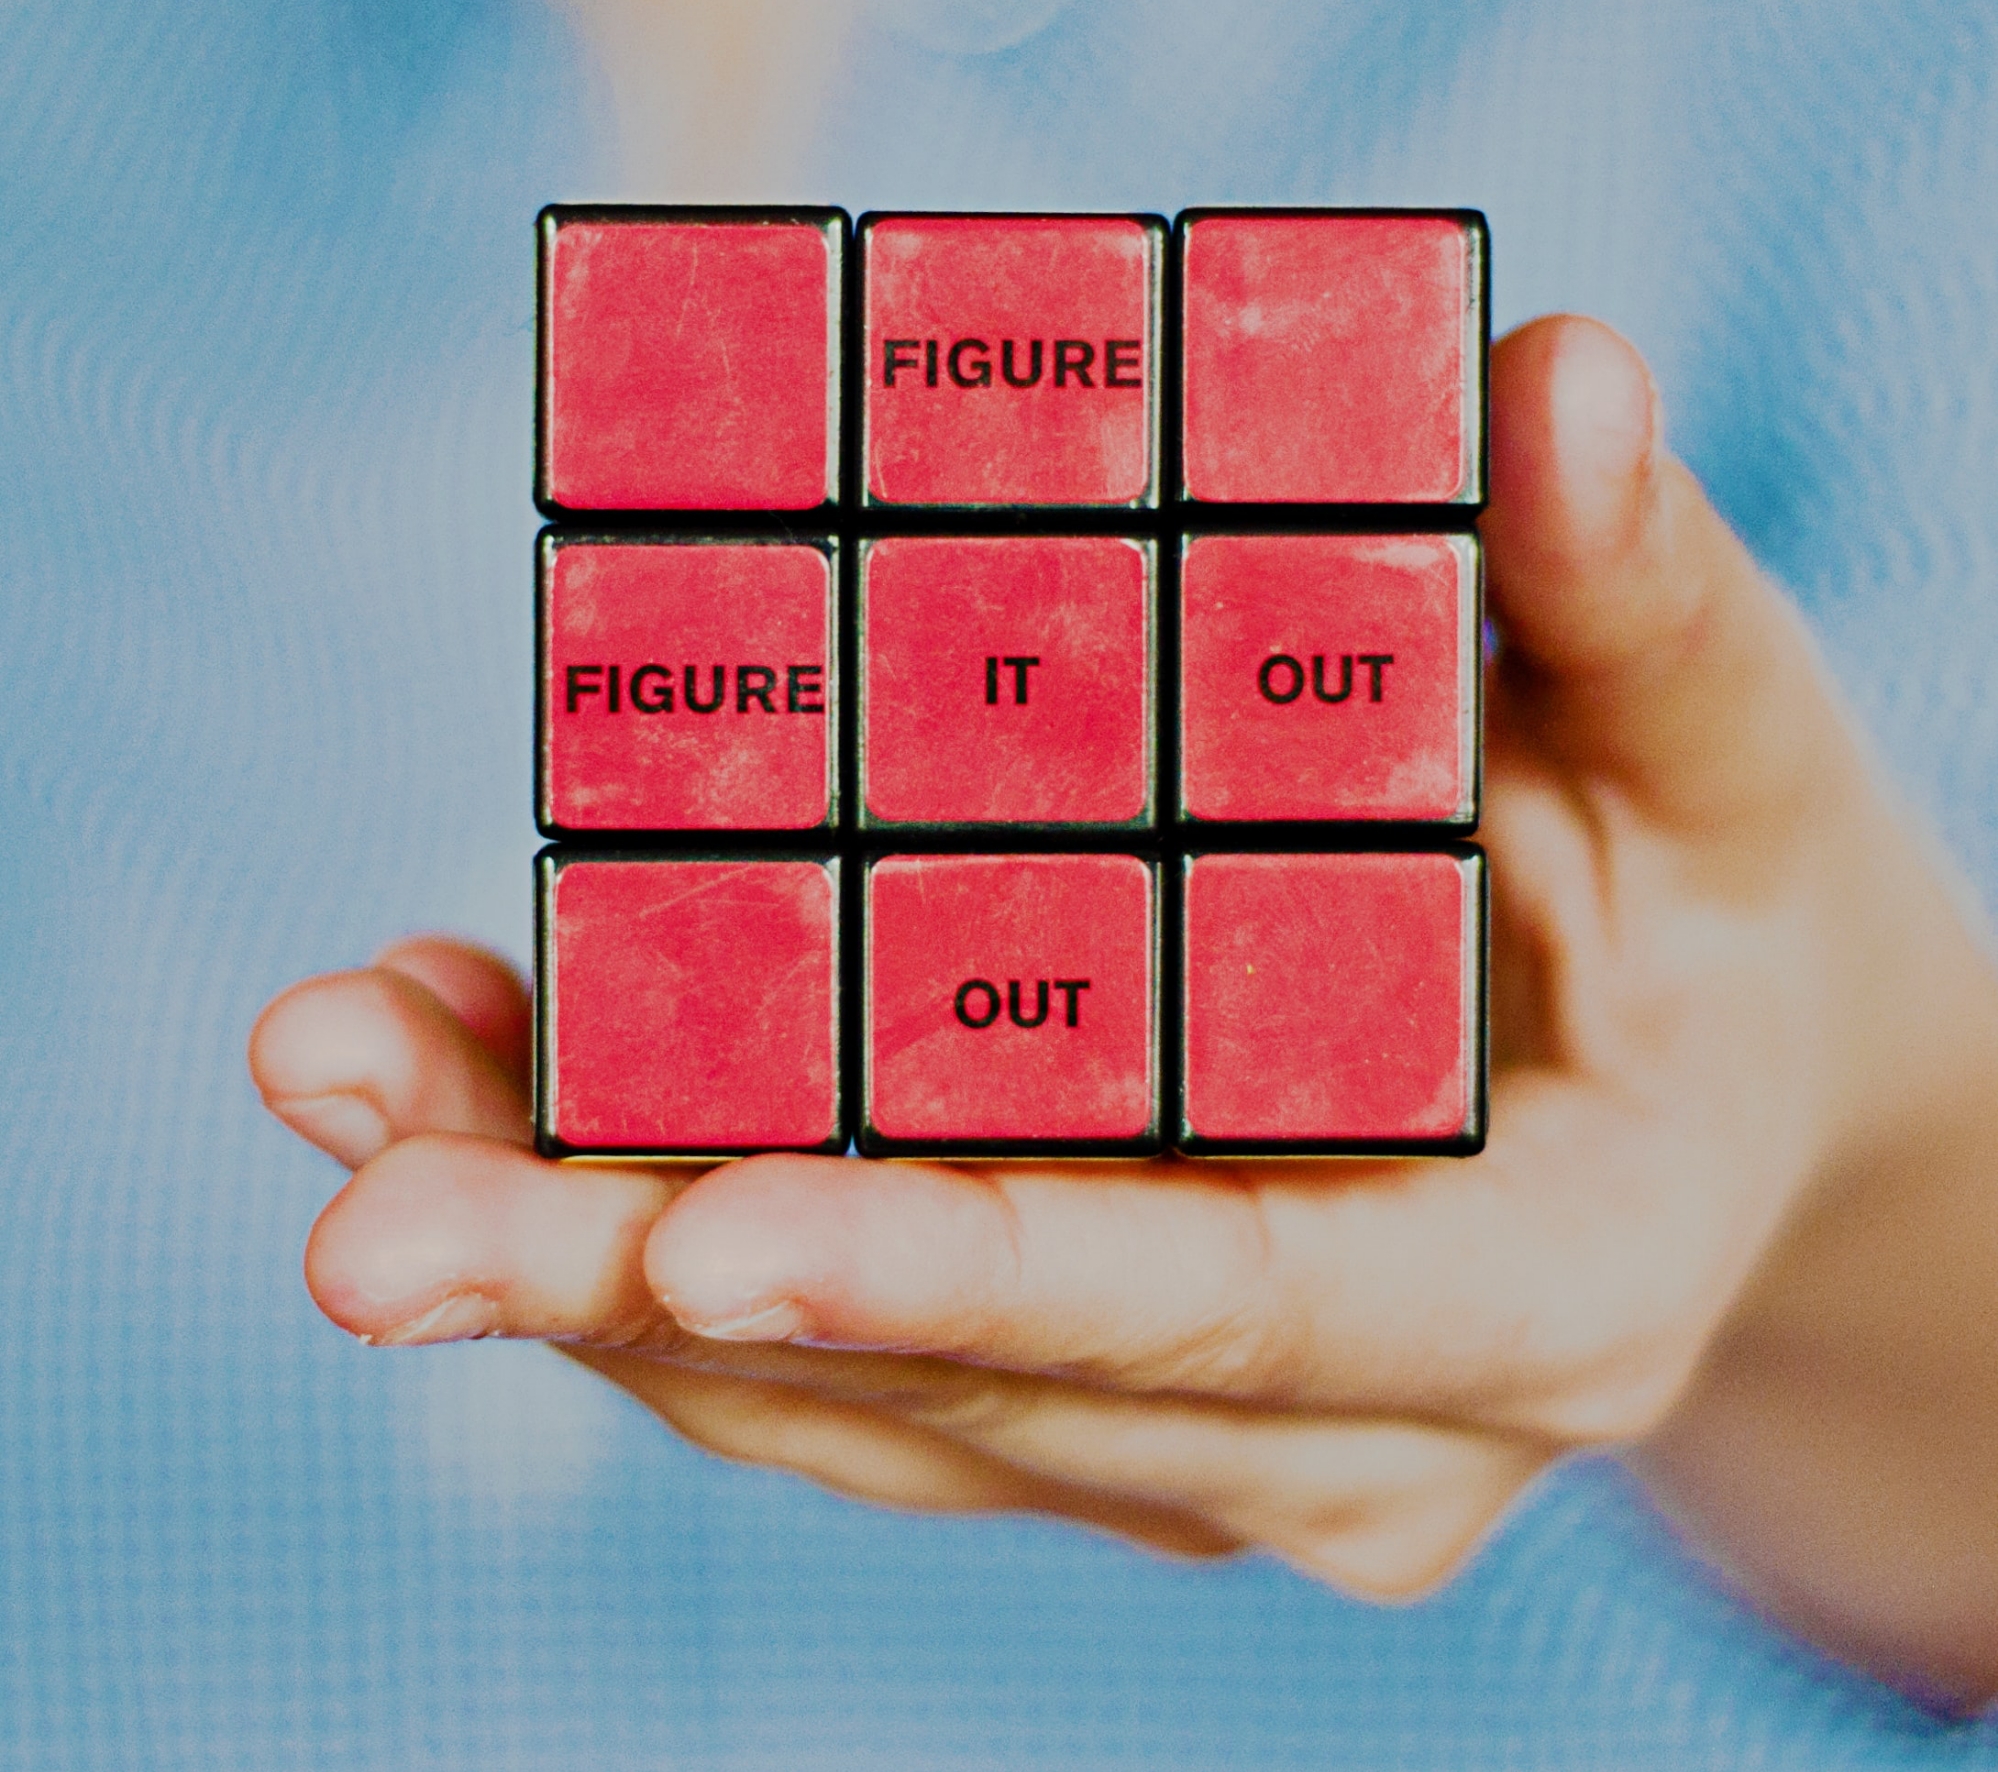 Hand holding a Rubi's cube that says "Figure It Out"